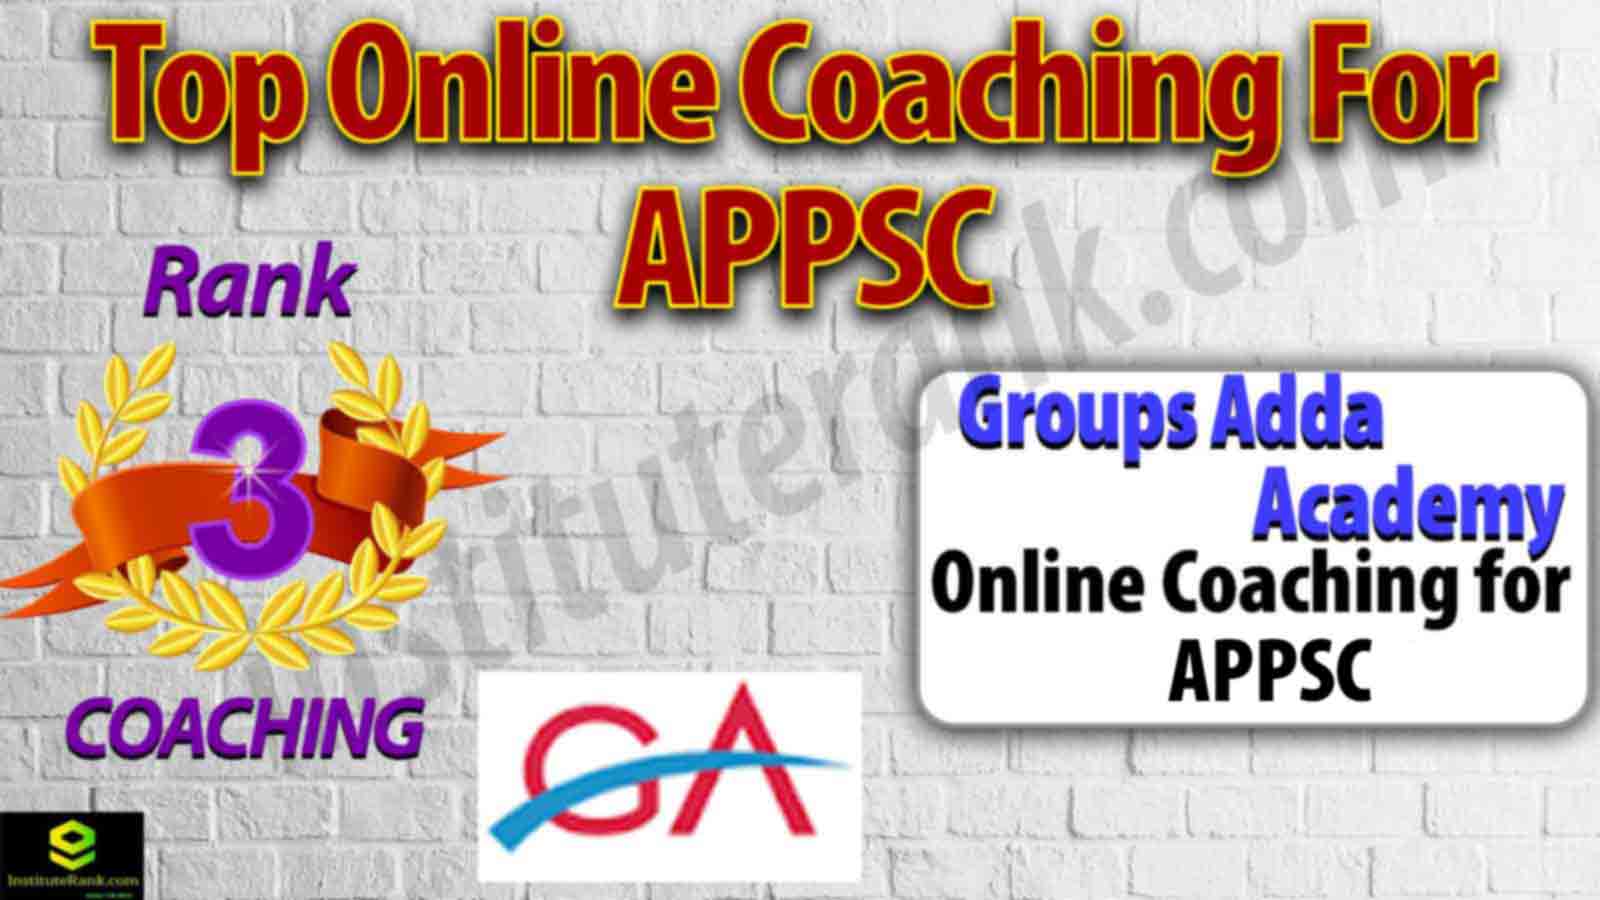 Top Online Coaching Preparation For APPSC Examination